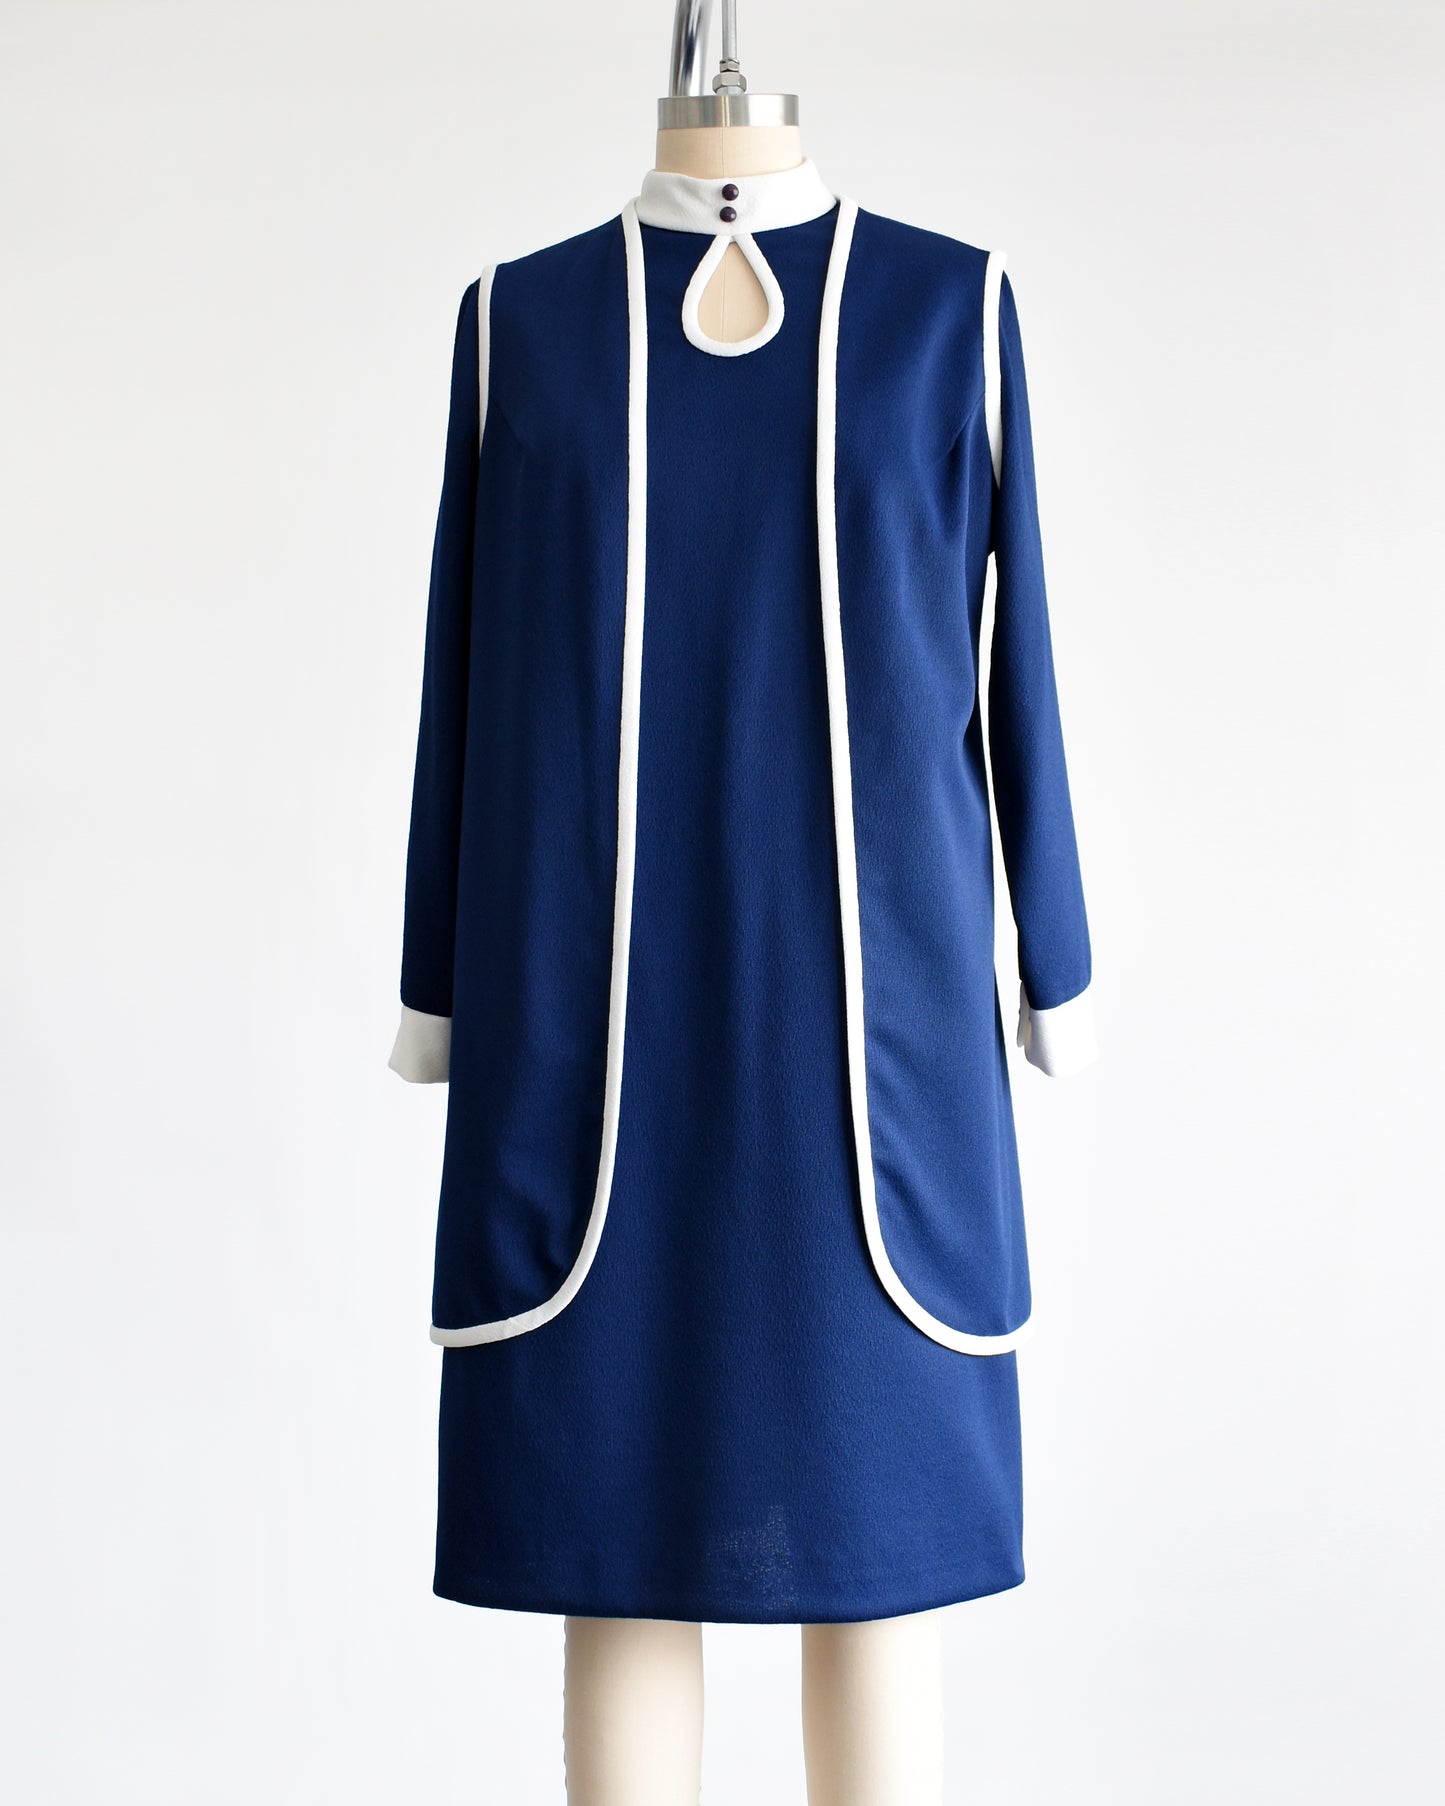 This late 1960s to early 1970s mod two piece set features a navy blue long sleeve dress and matching vest.  There is no belt in this photo